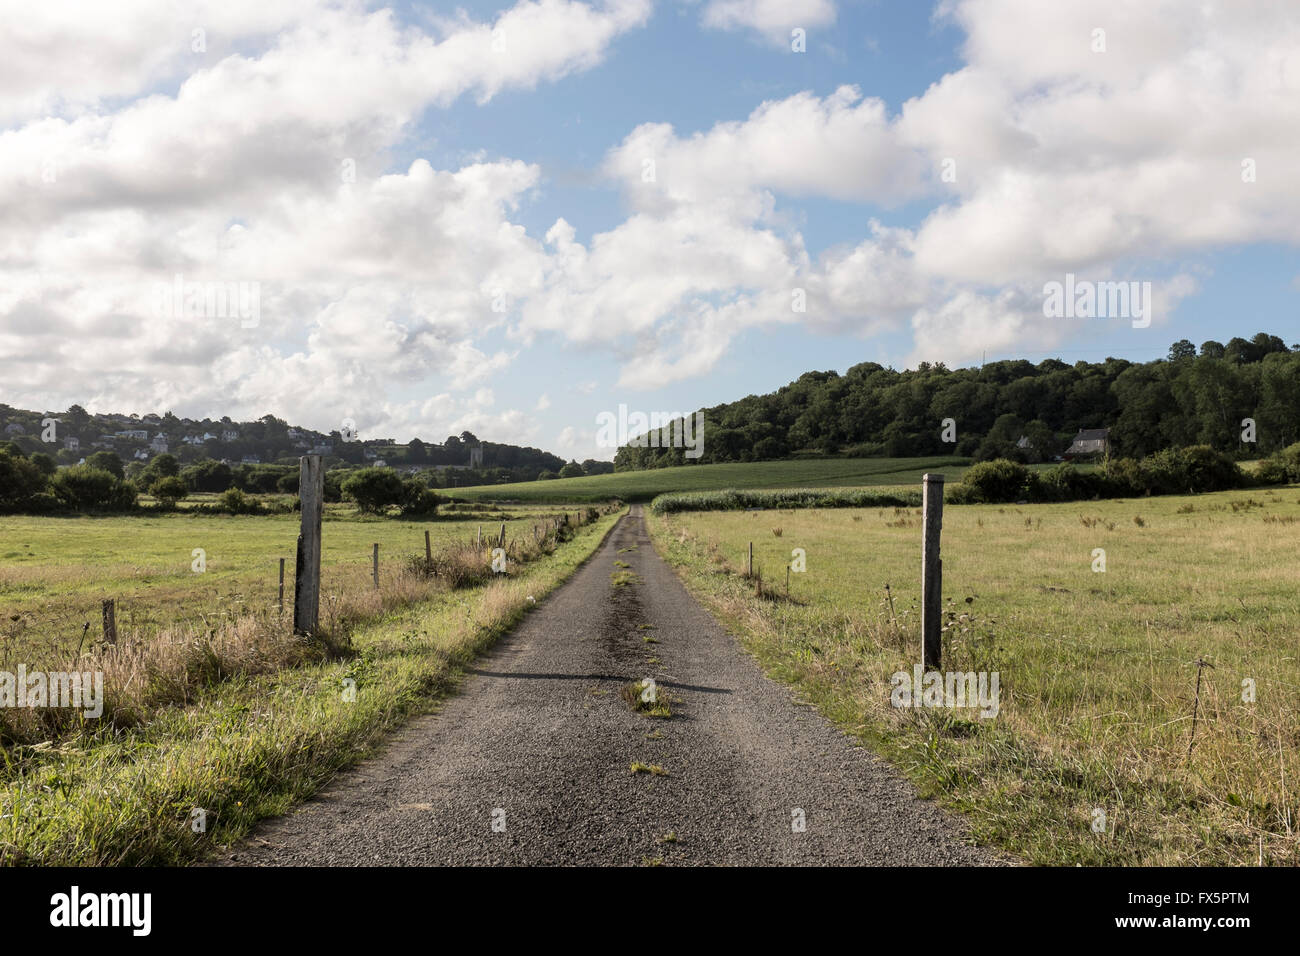 A deserted road leads off into the distance in Britanny, France Stock Photo